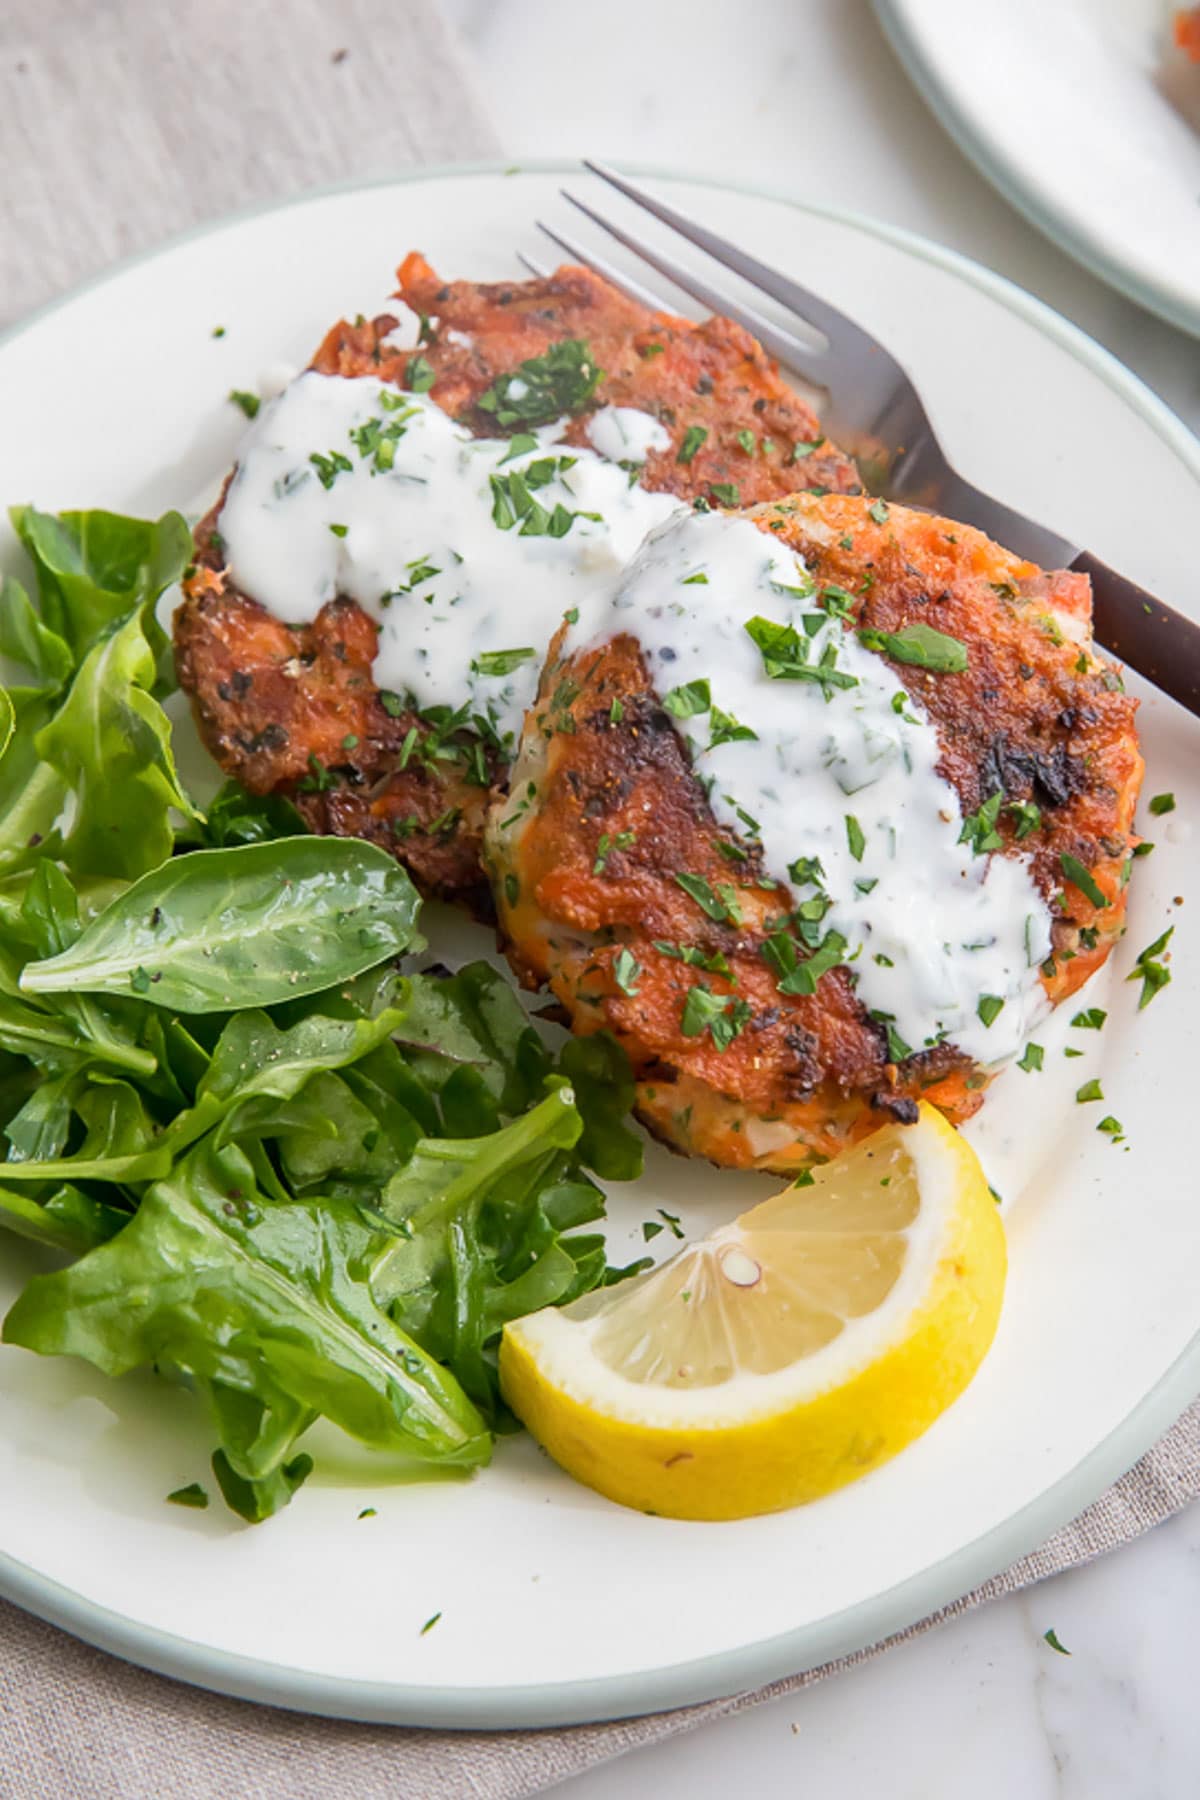 Creamy dill sauce spooned over salmon patties on a white plate.